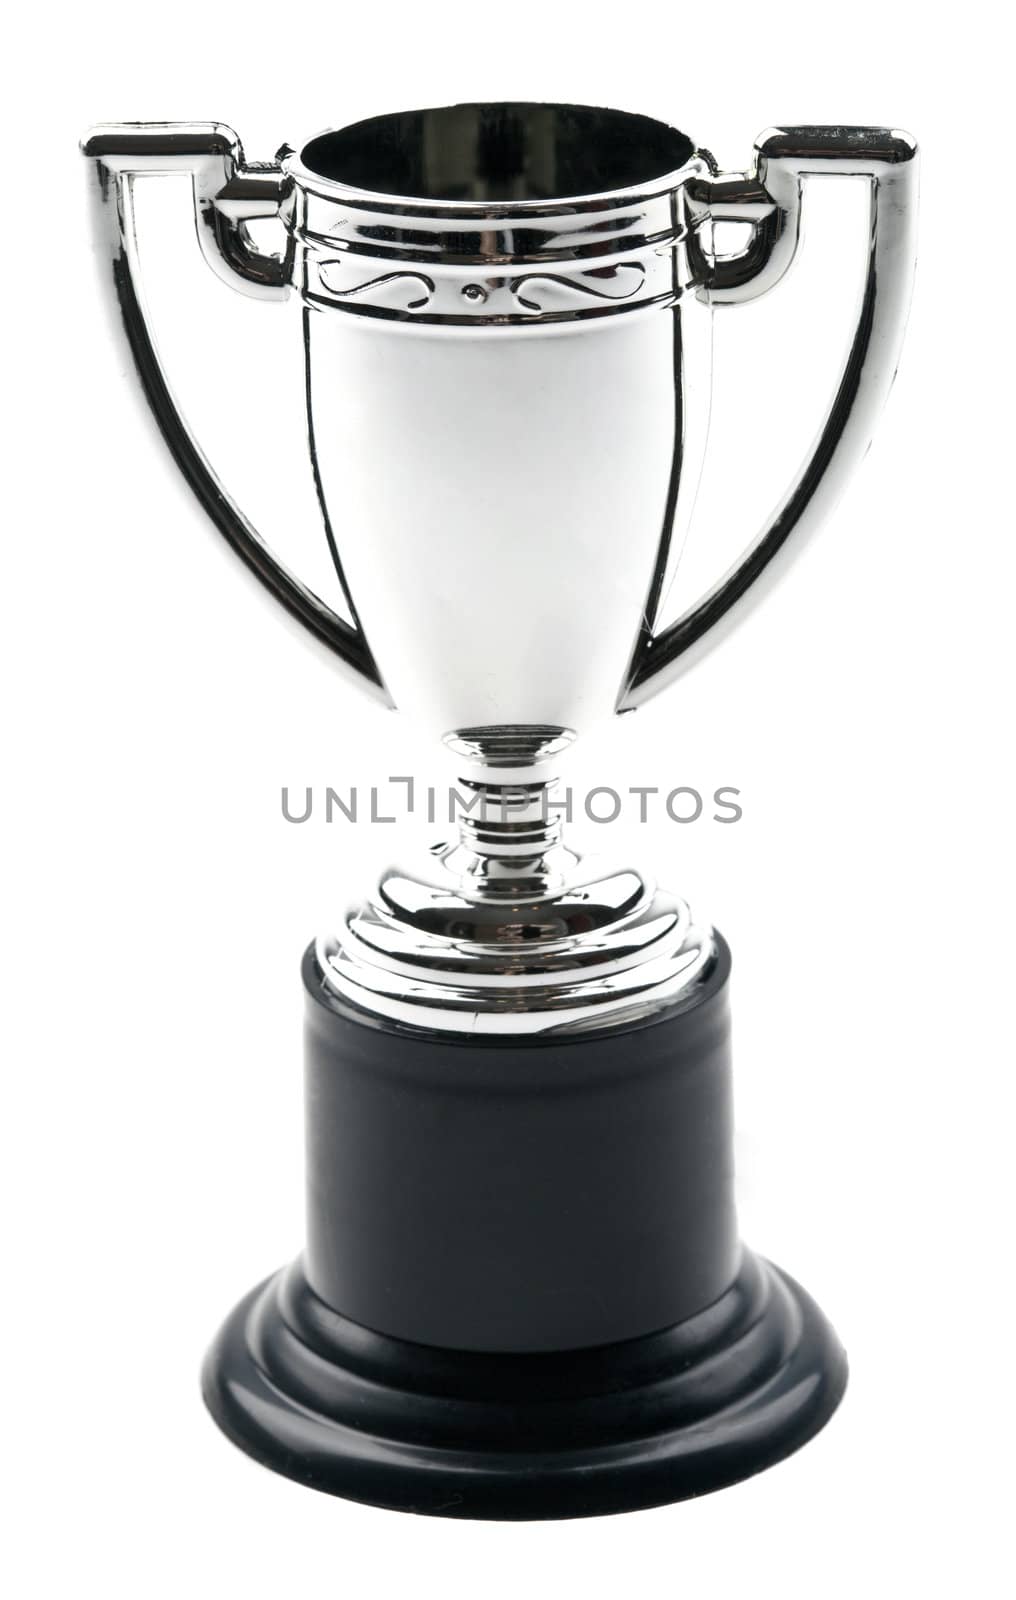 A Trophy over a plain white background.